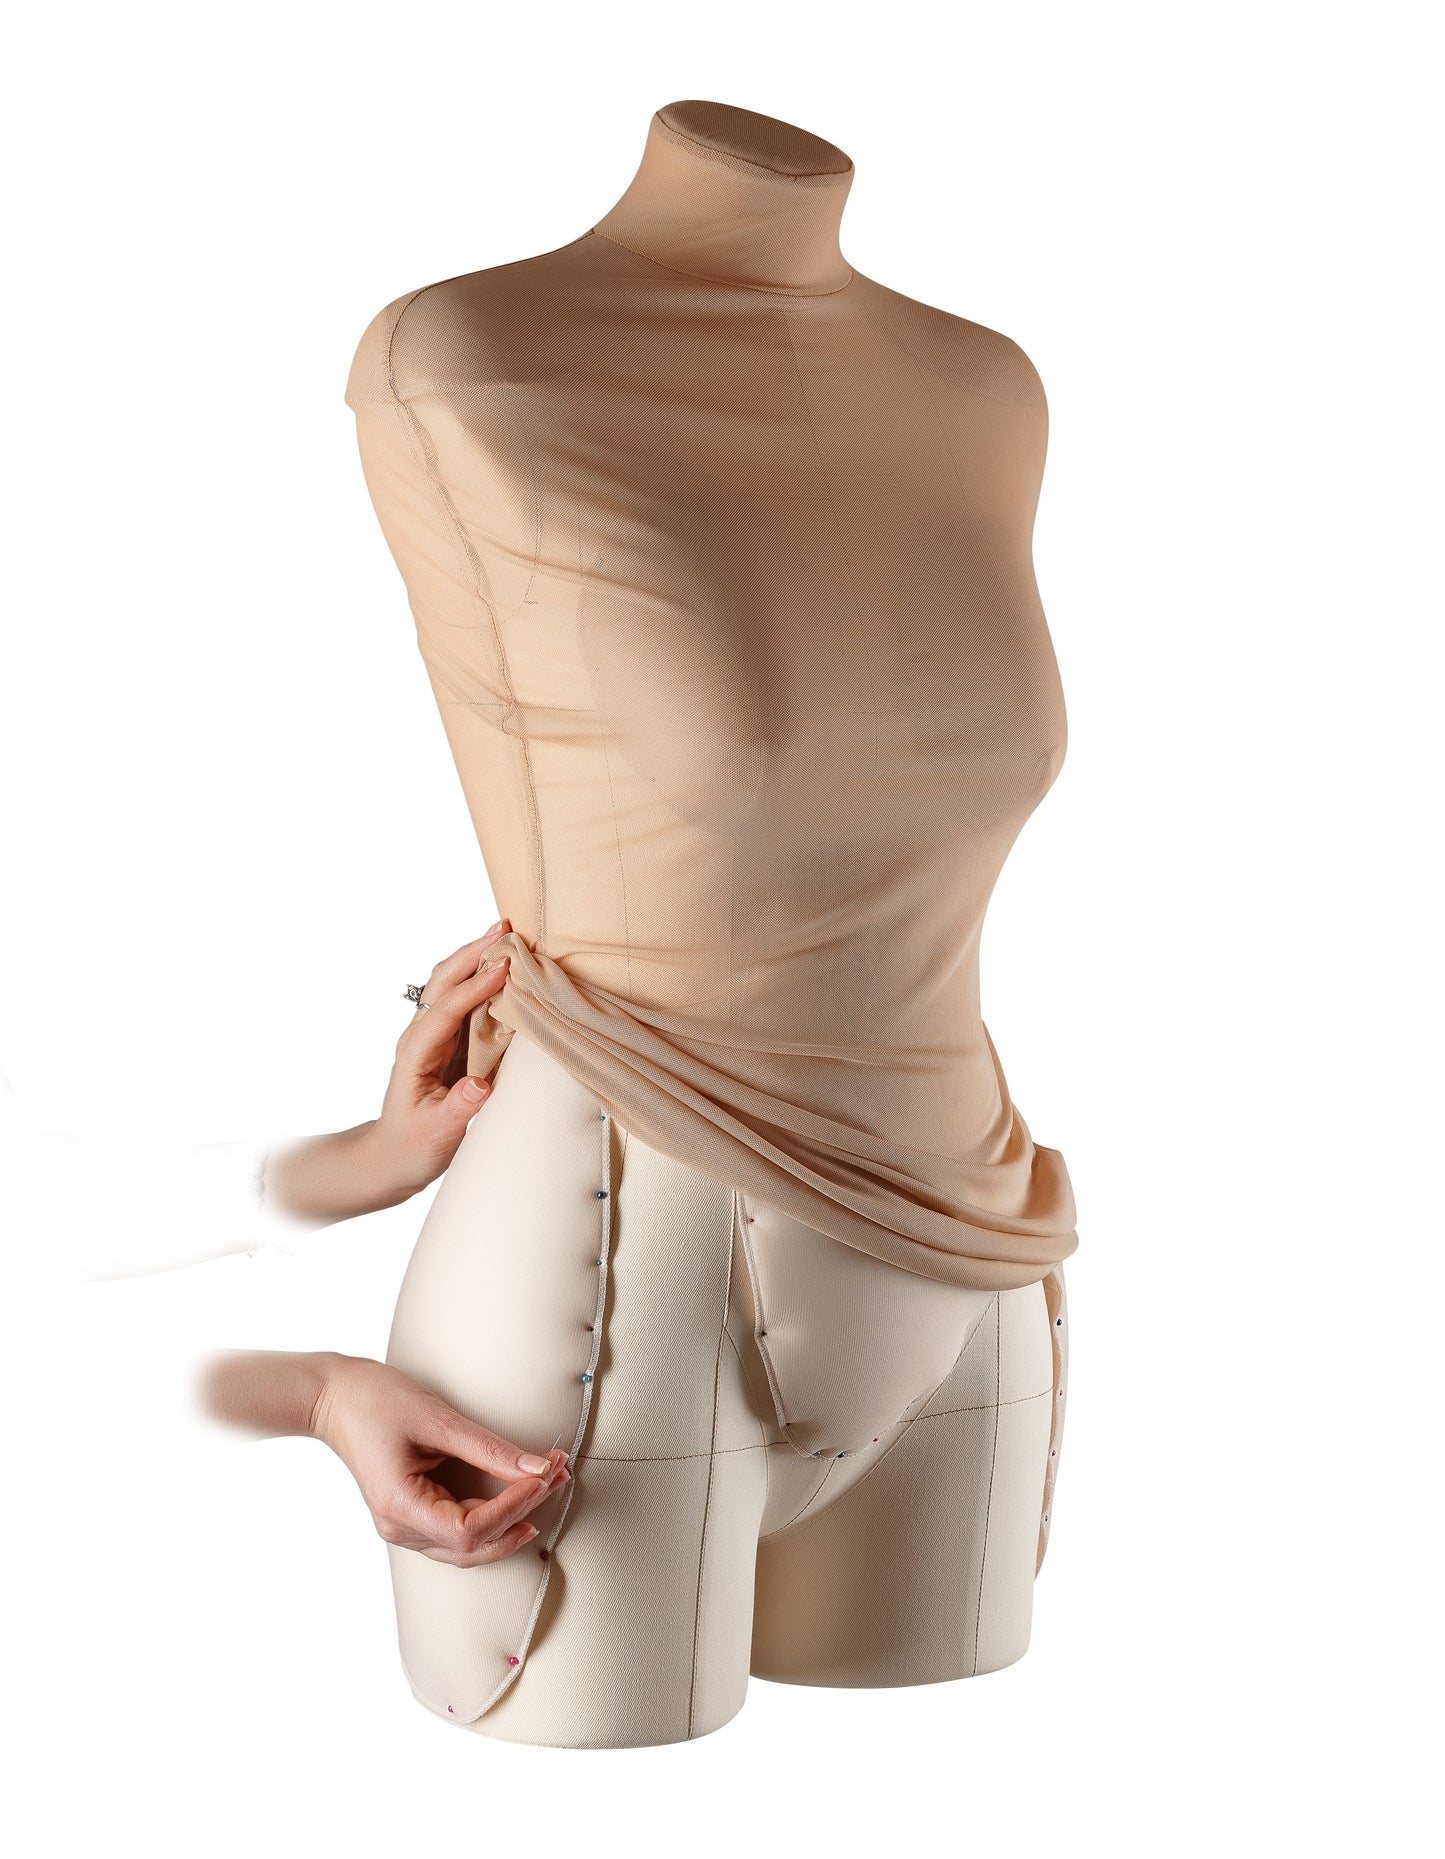 Padding Fitting System for soft tailor’s dress forms